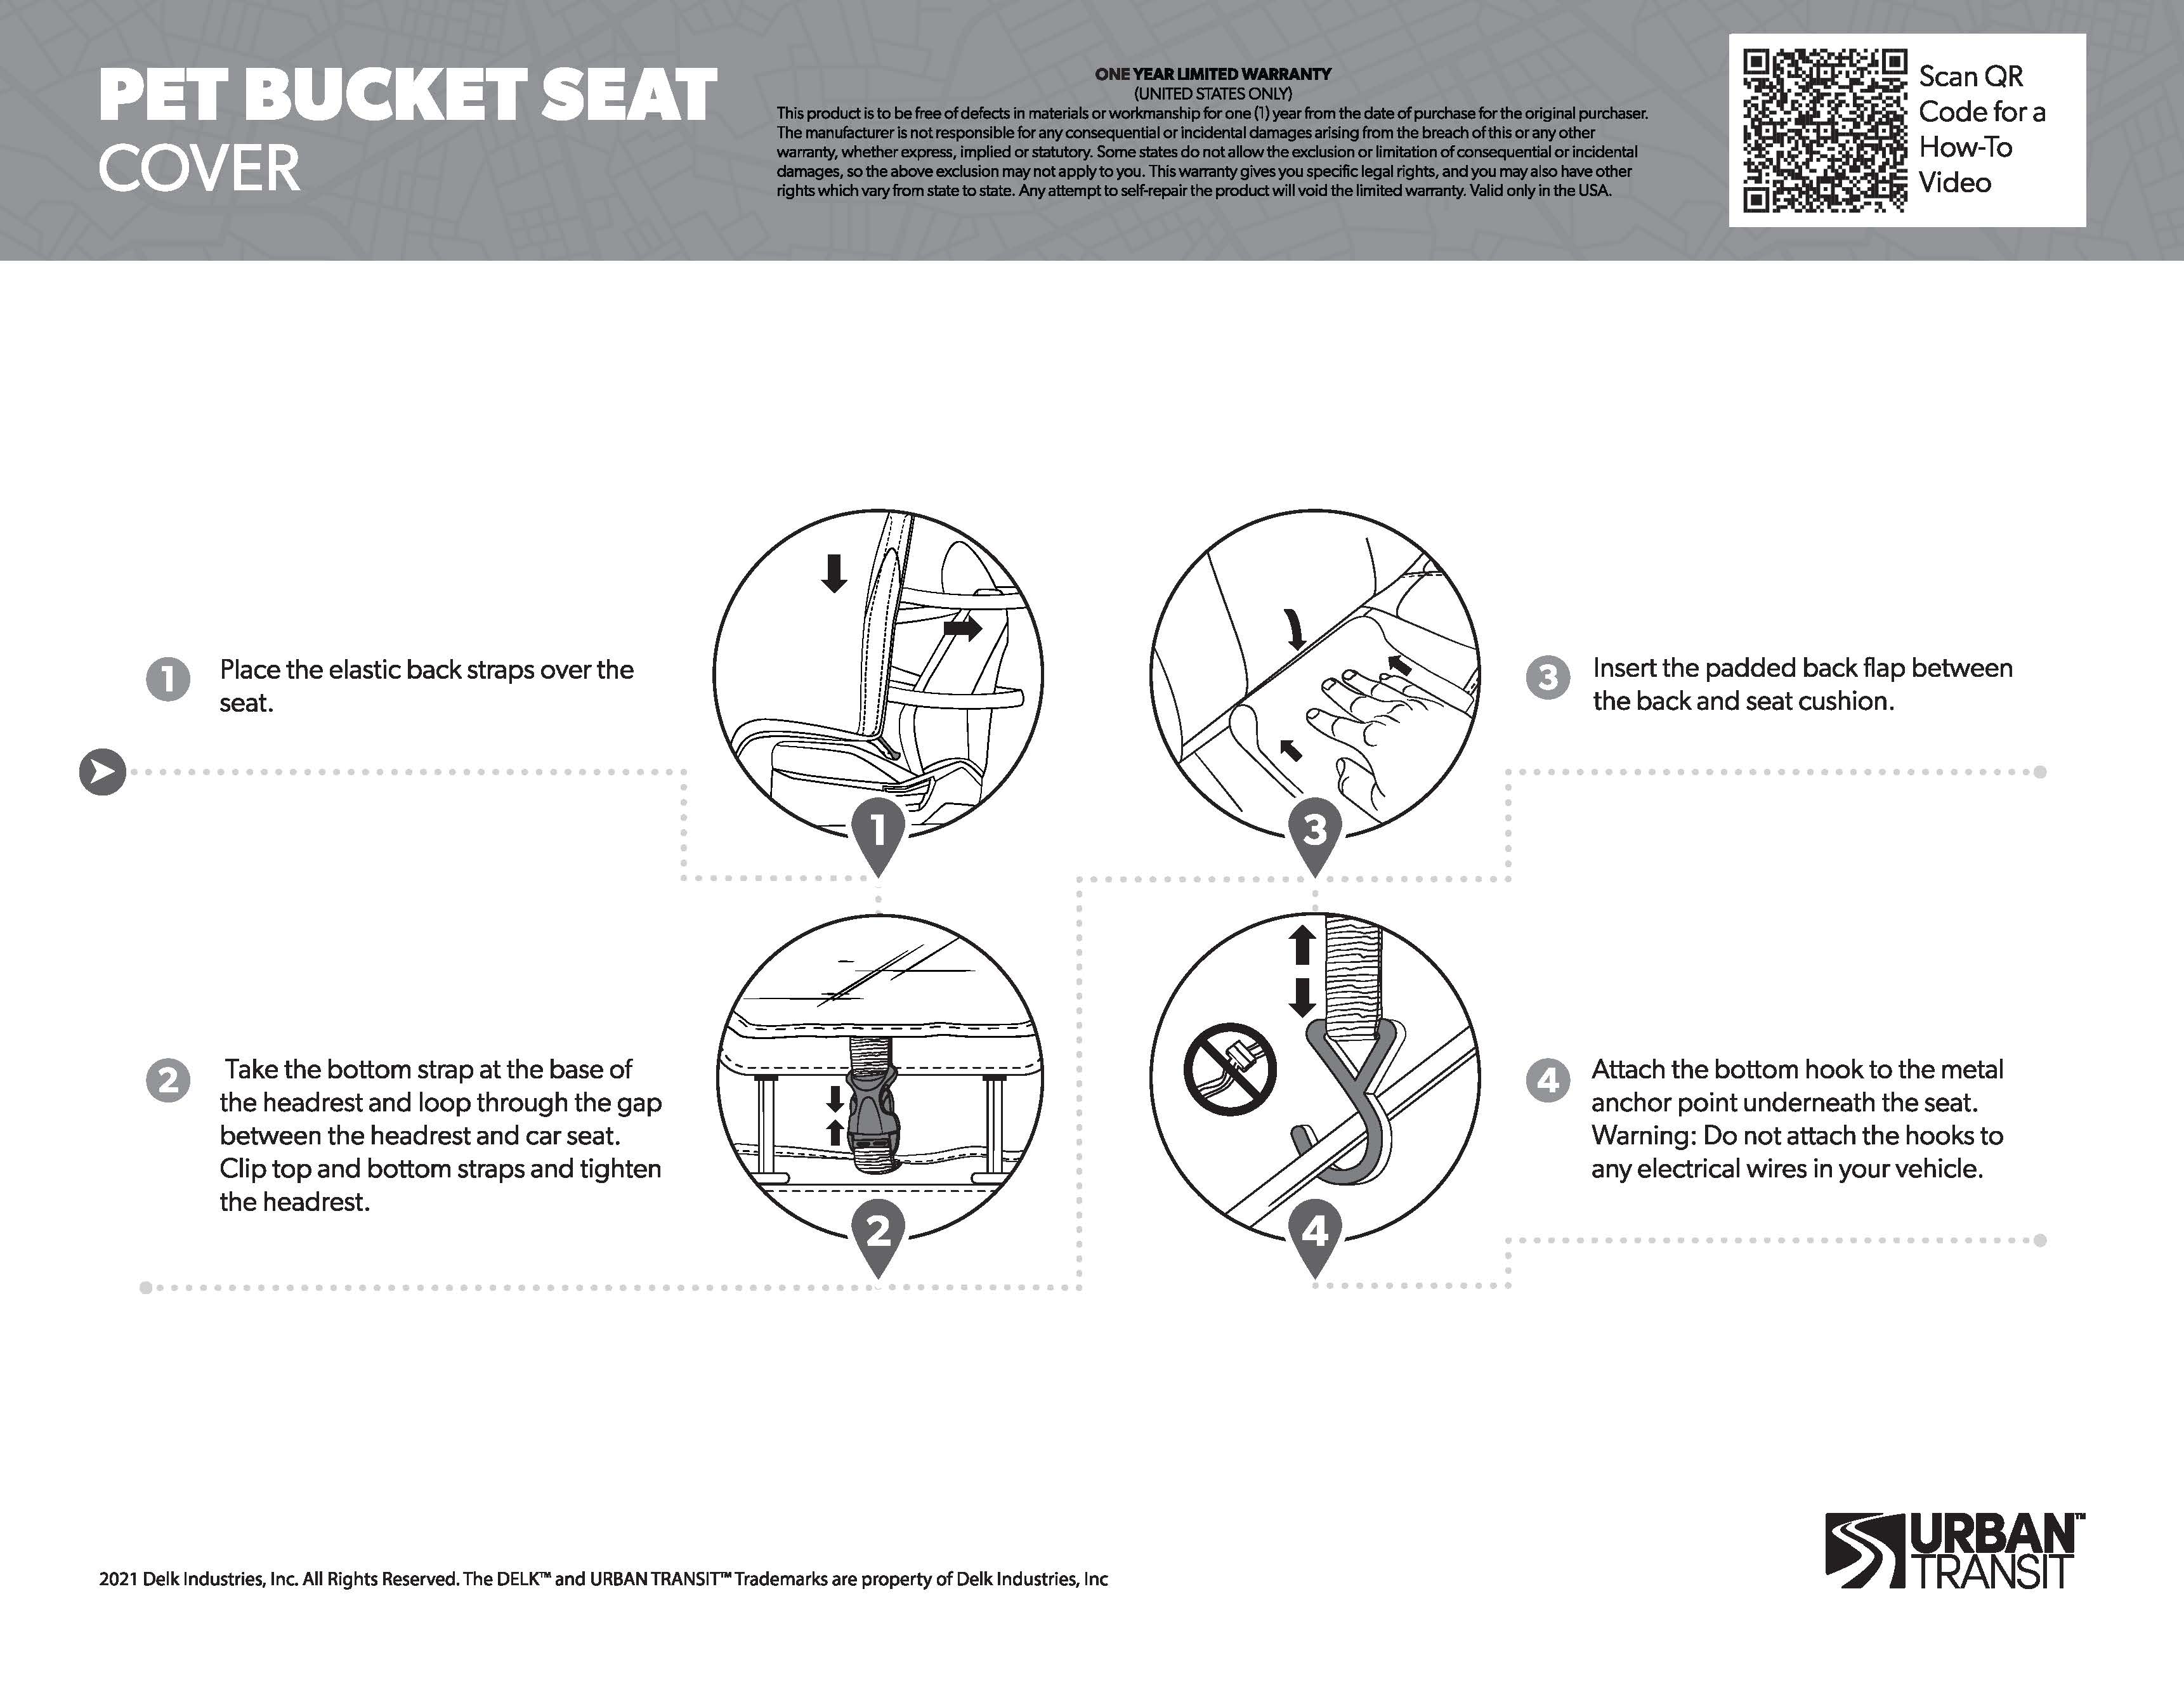 53288-Pet_Bucket_Seat_Cover-IM-OUT.jpg